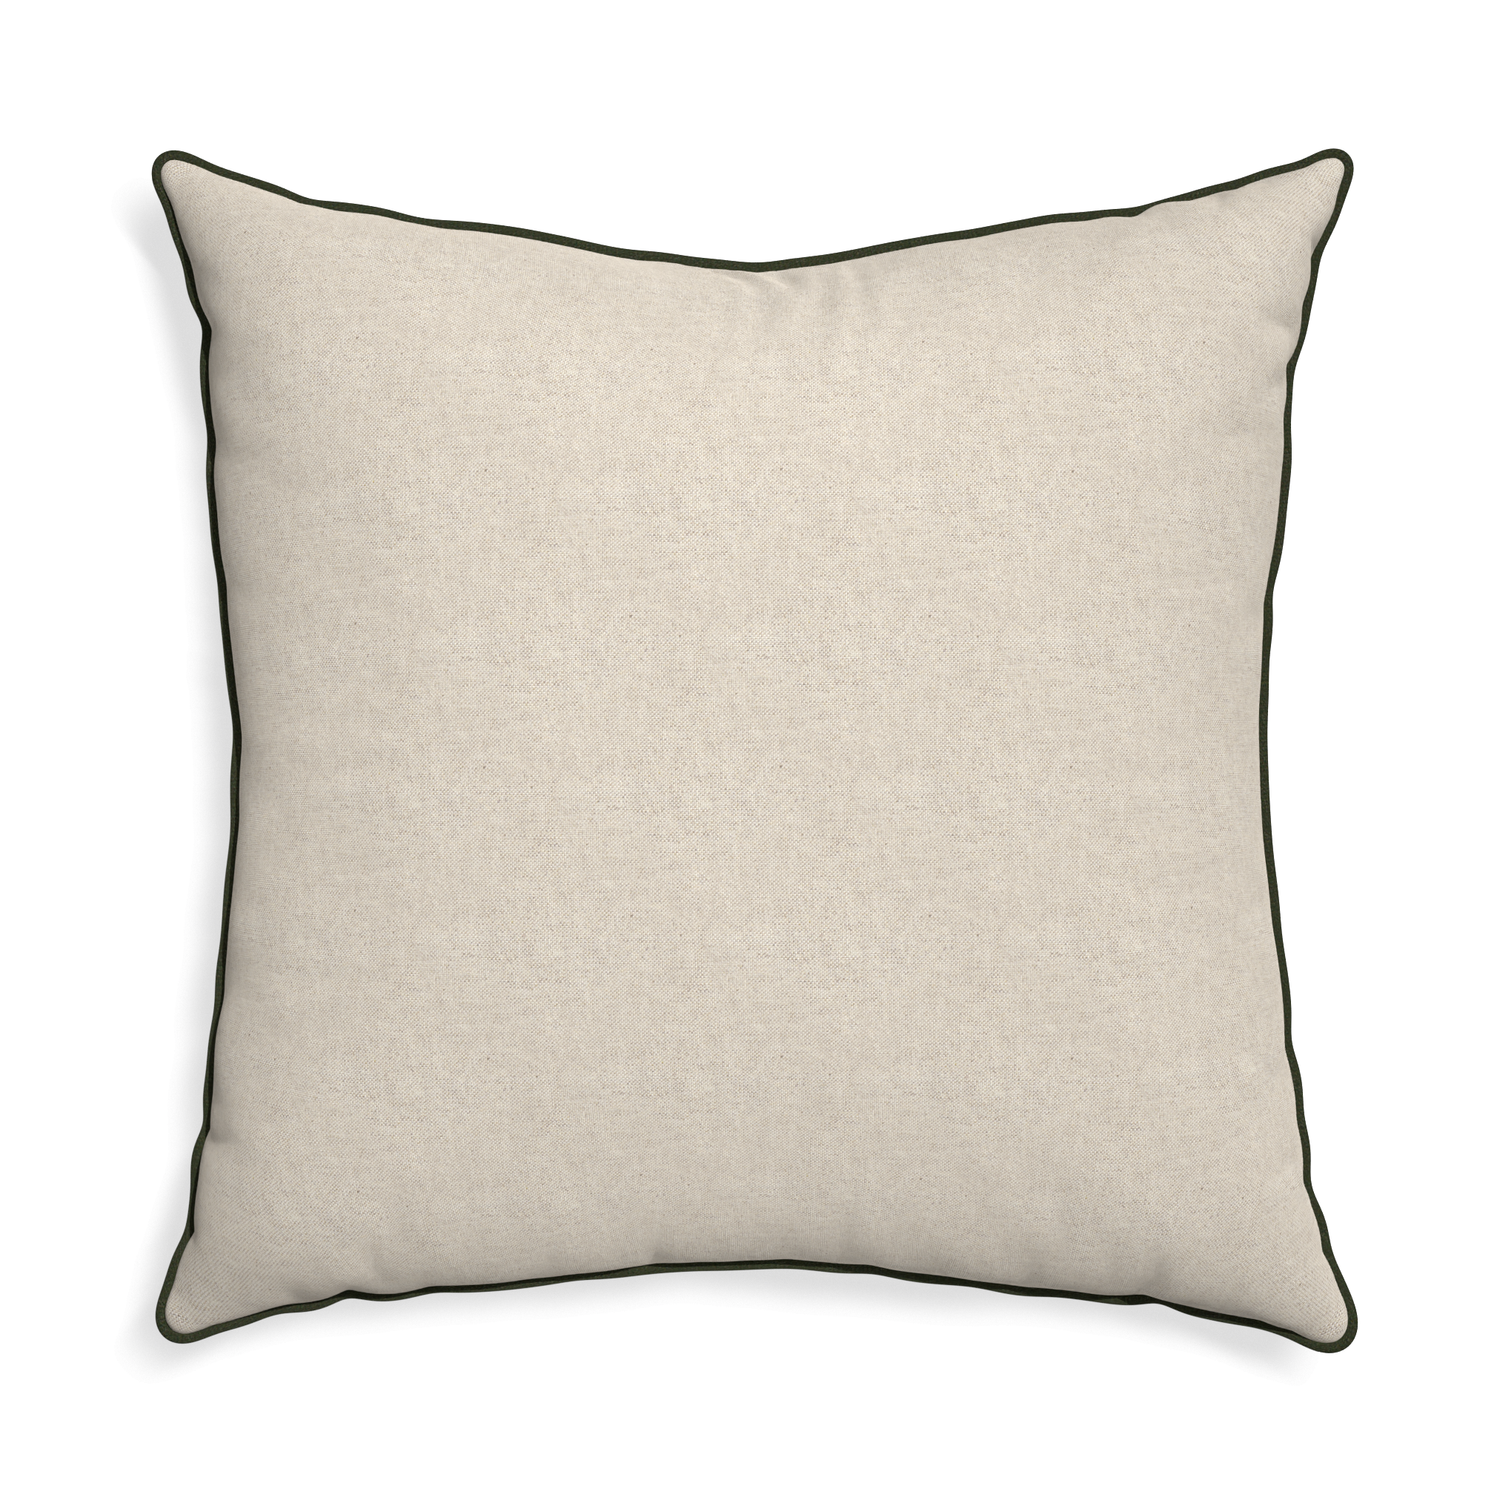 Euro-sham oat custom light brownpillow with f piping on white background